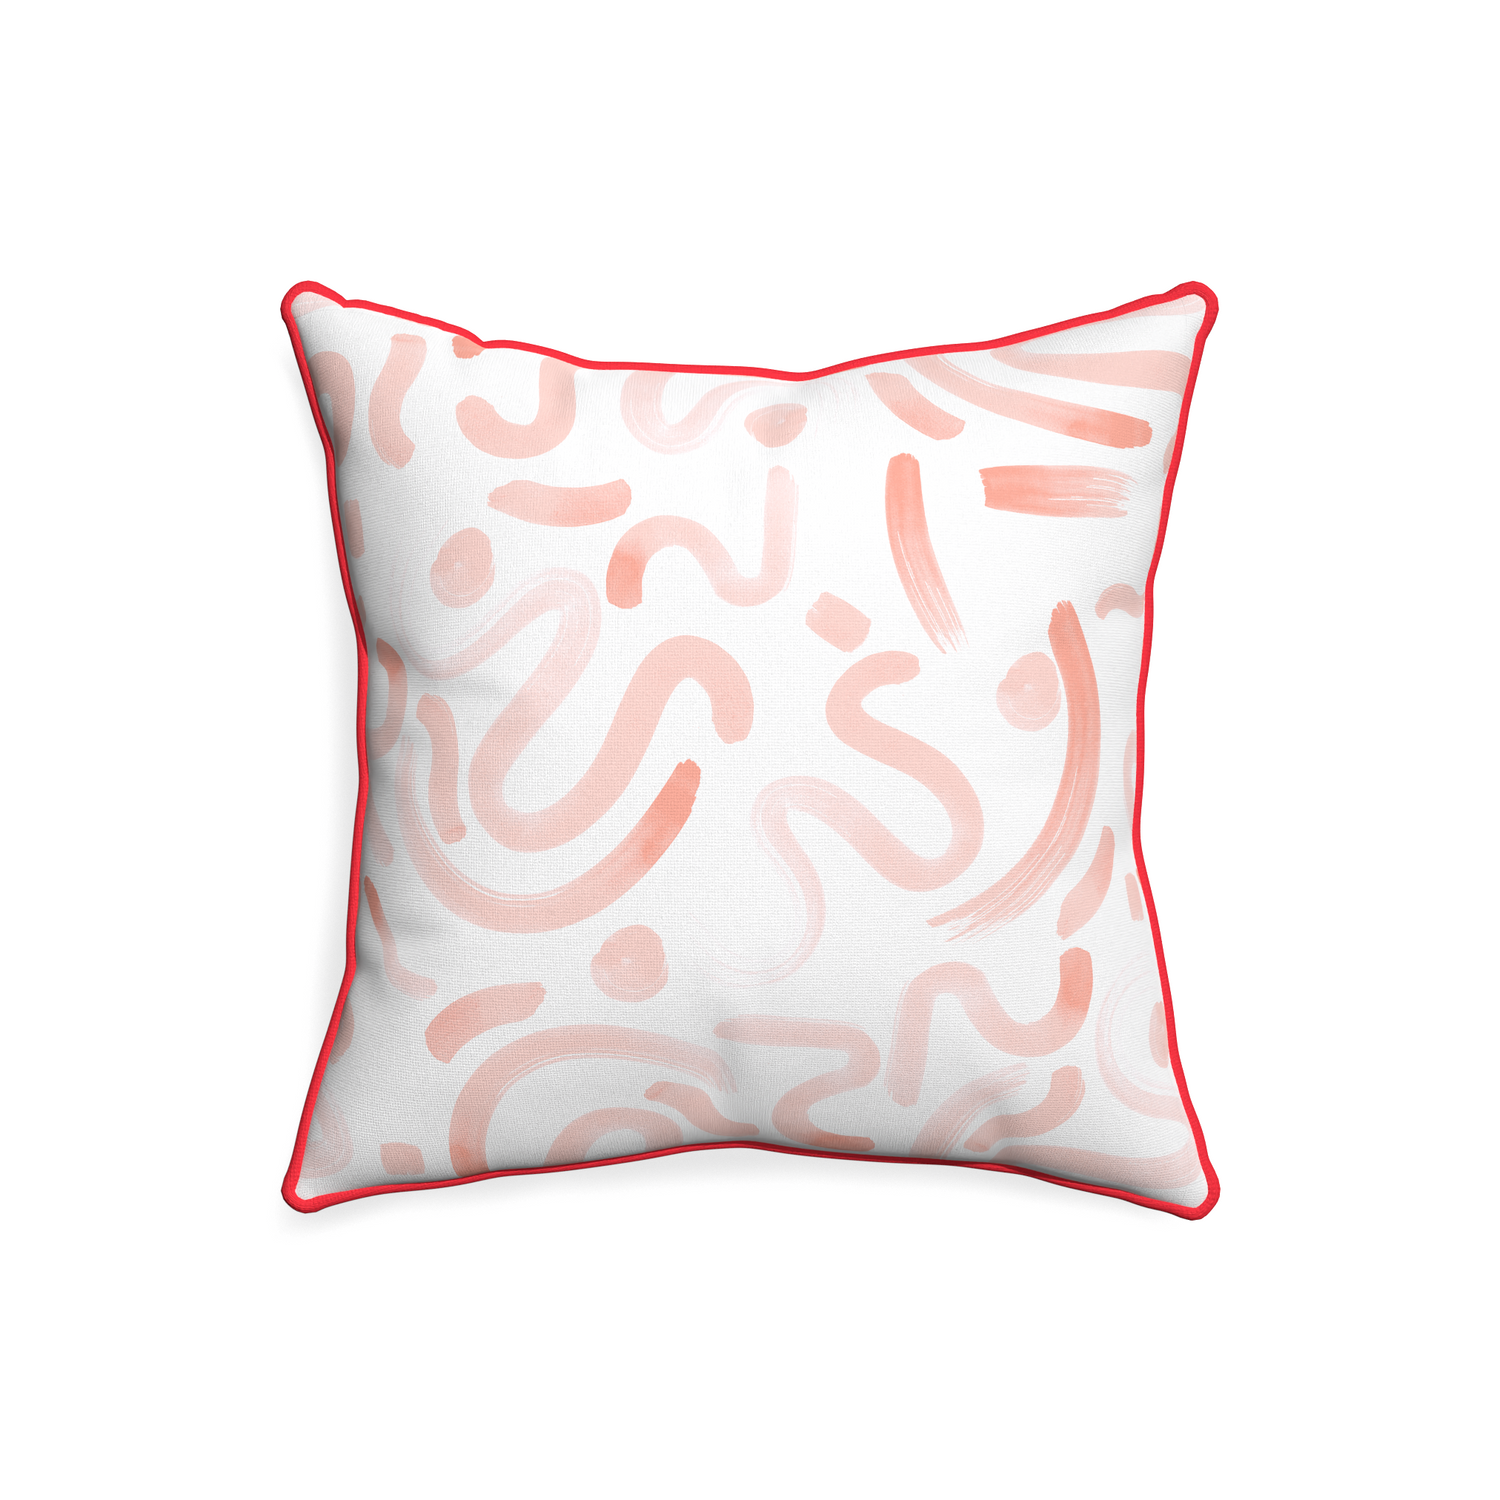 20-square hockney pink custom pink graphicpillow with cherry piping on white background